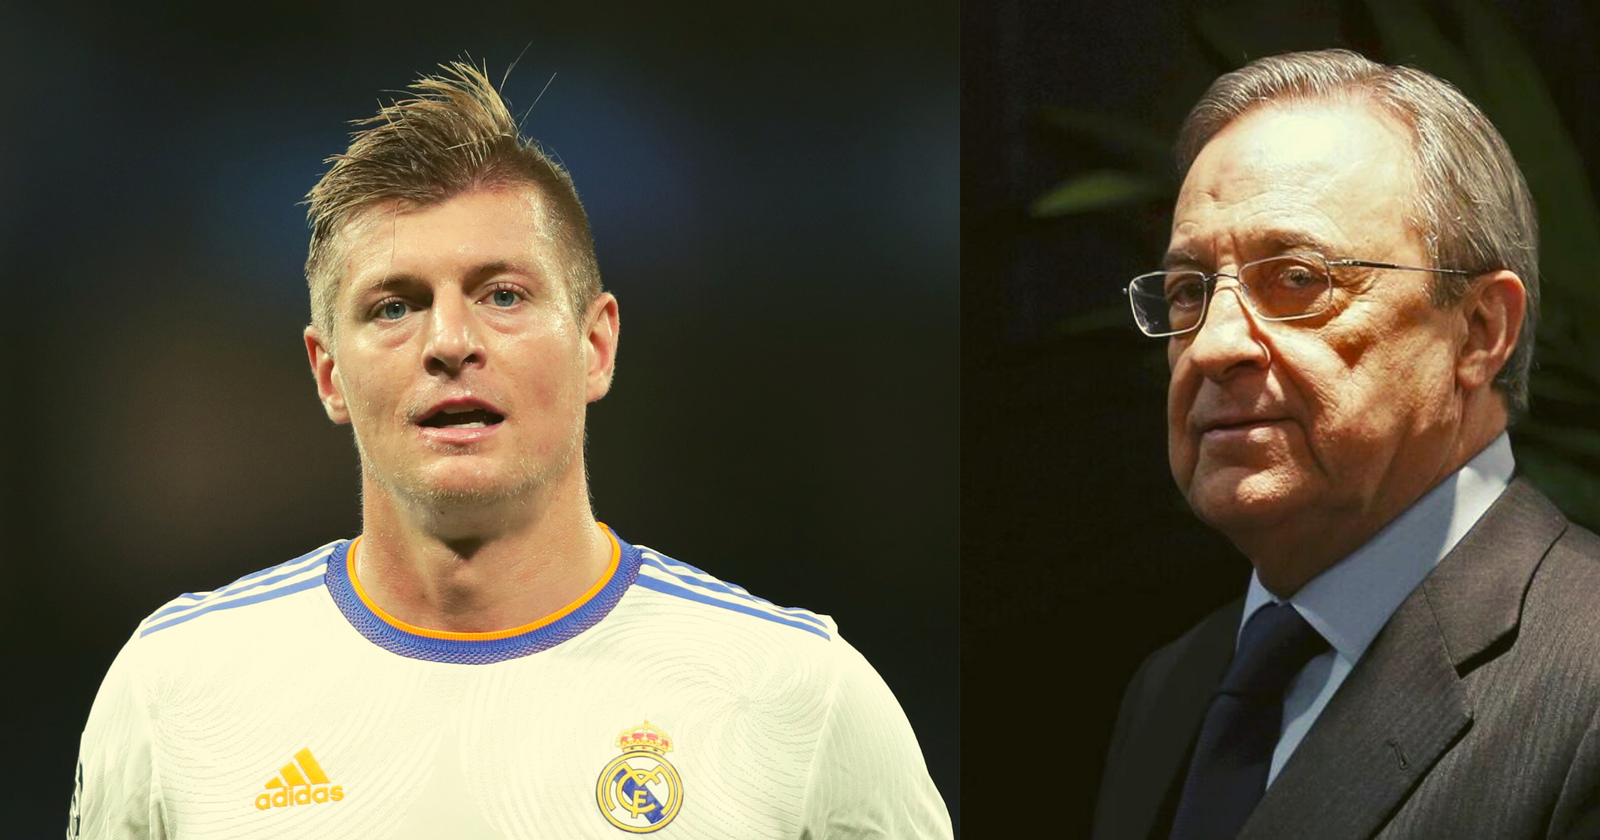 Toni Kroos Has A Bid From European Side; Real Madrid Responds